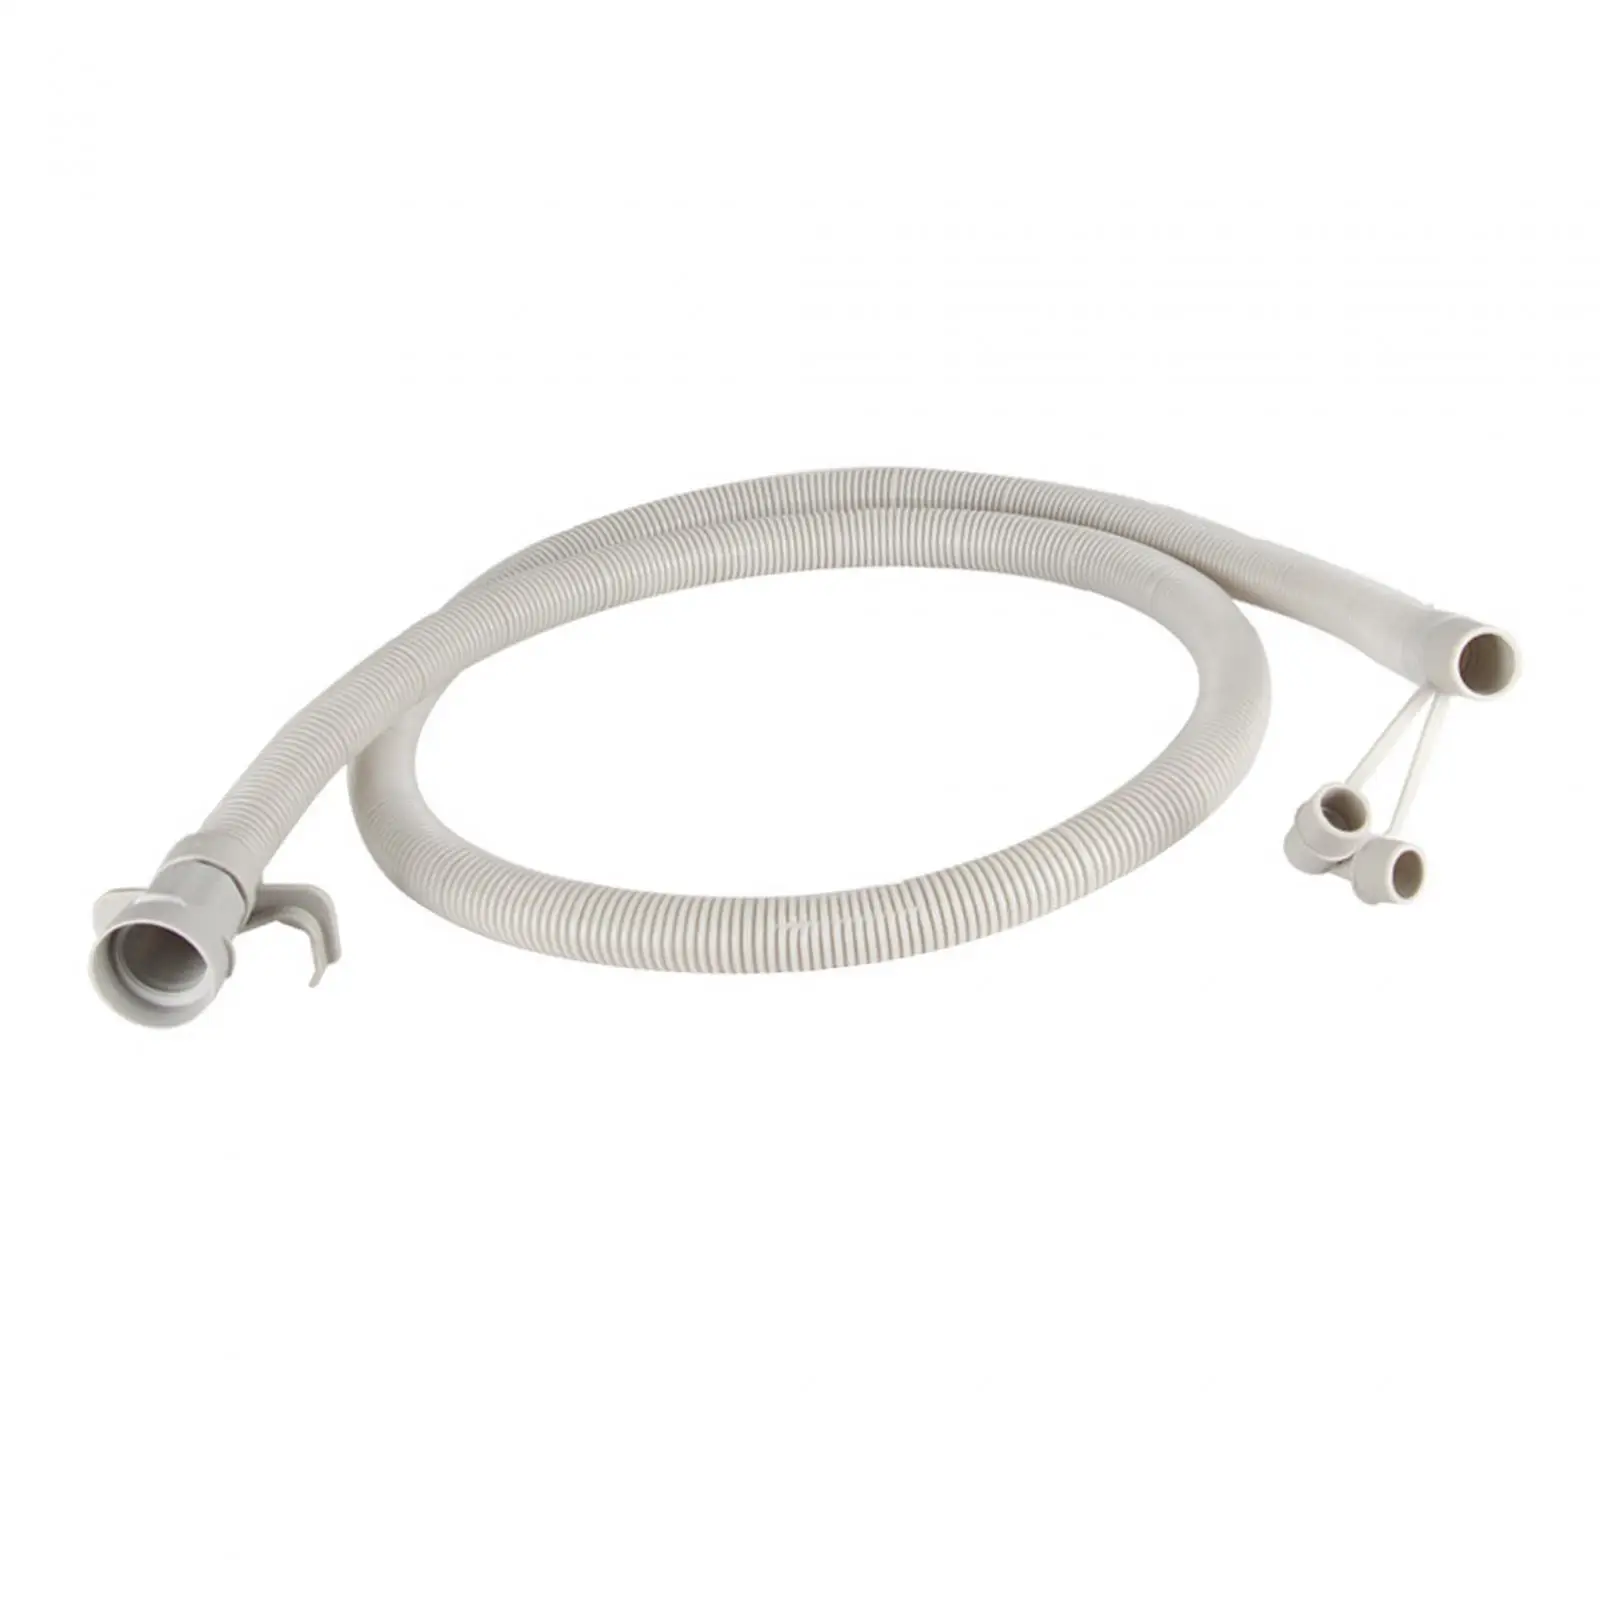 Inflatable Pump Hose with Nozzle Connectors Paddleboard Floats Foot Pump Hose Air Hose for Kayaking Inflatable Tents Surfboard